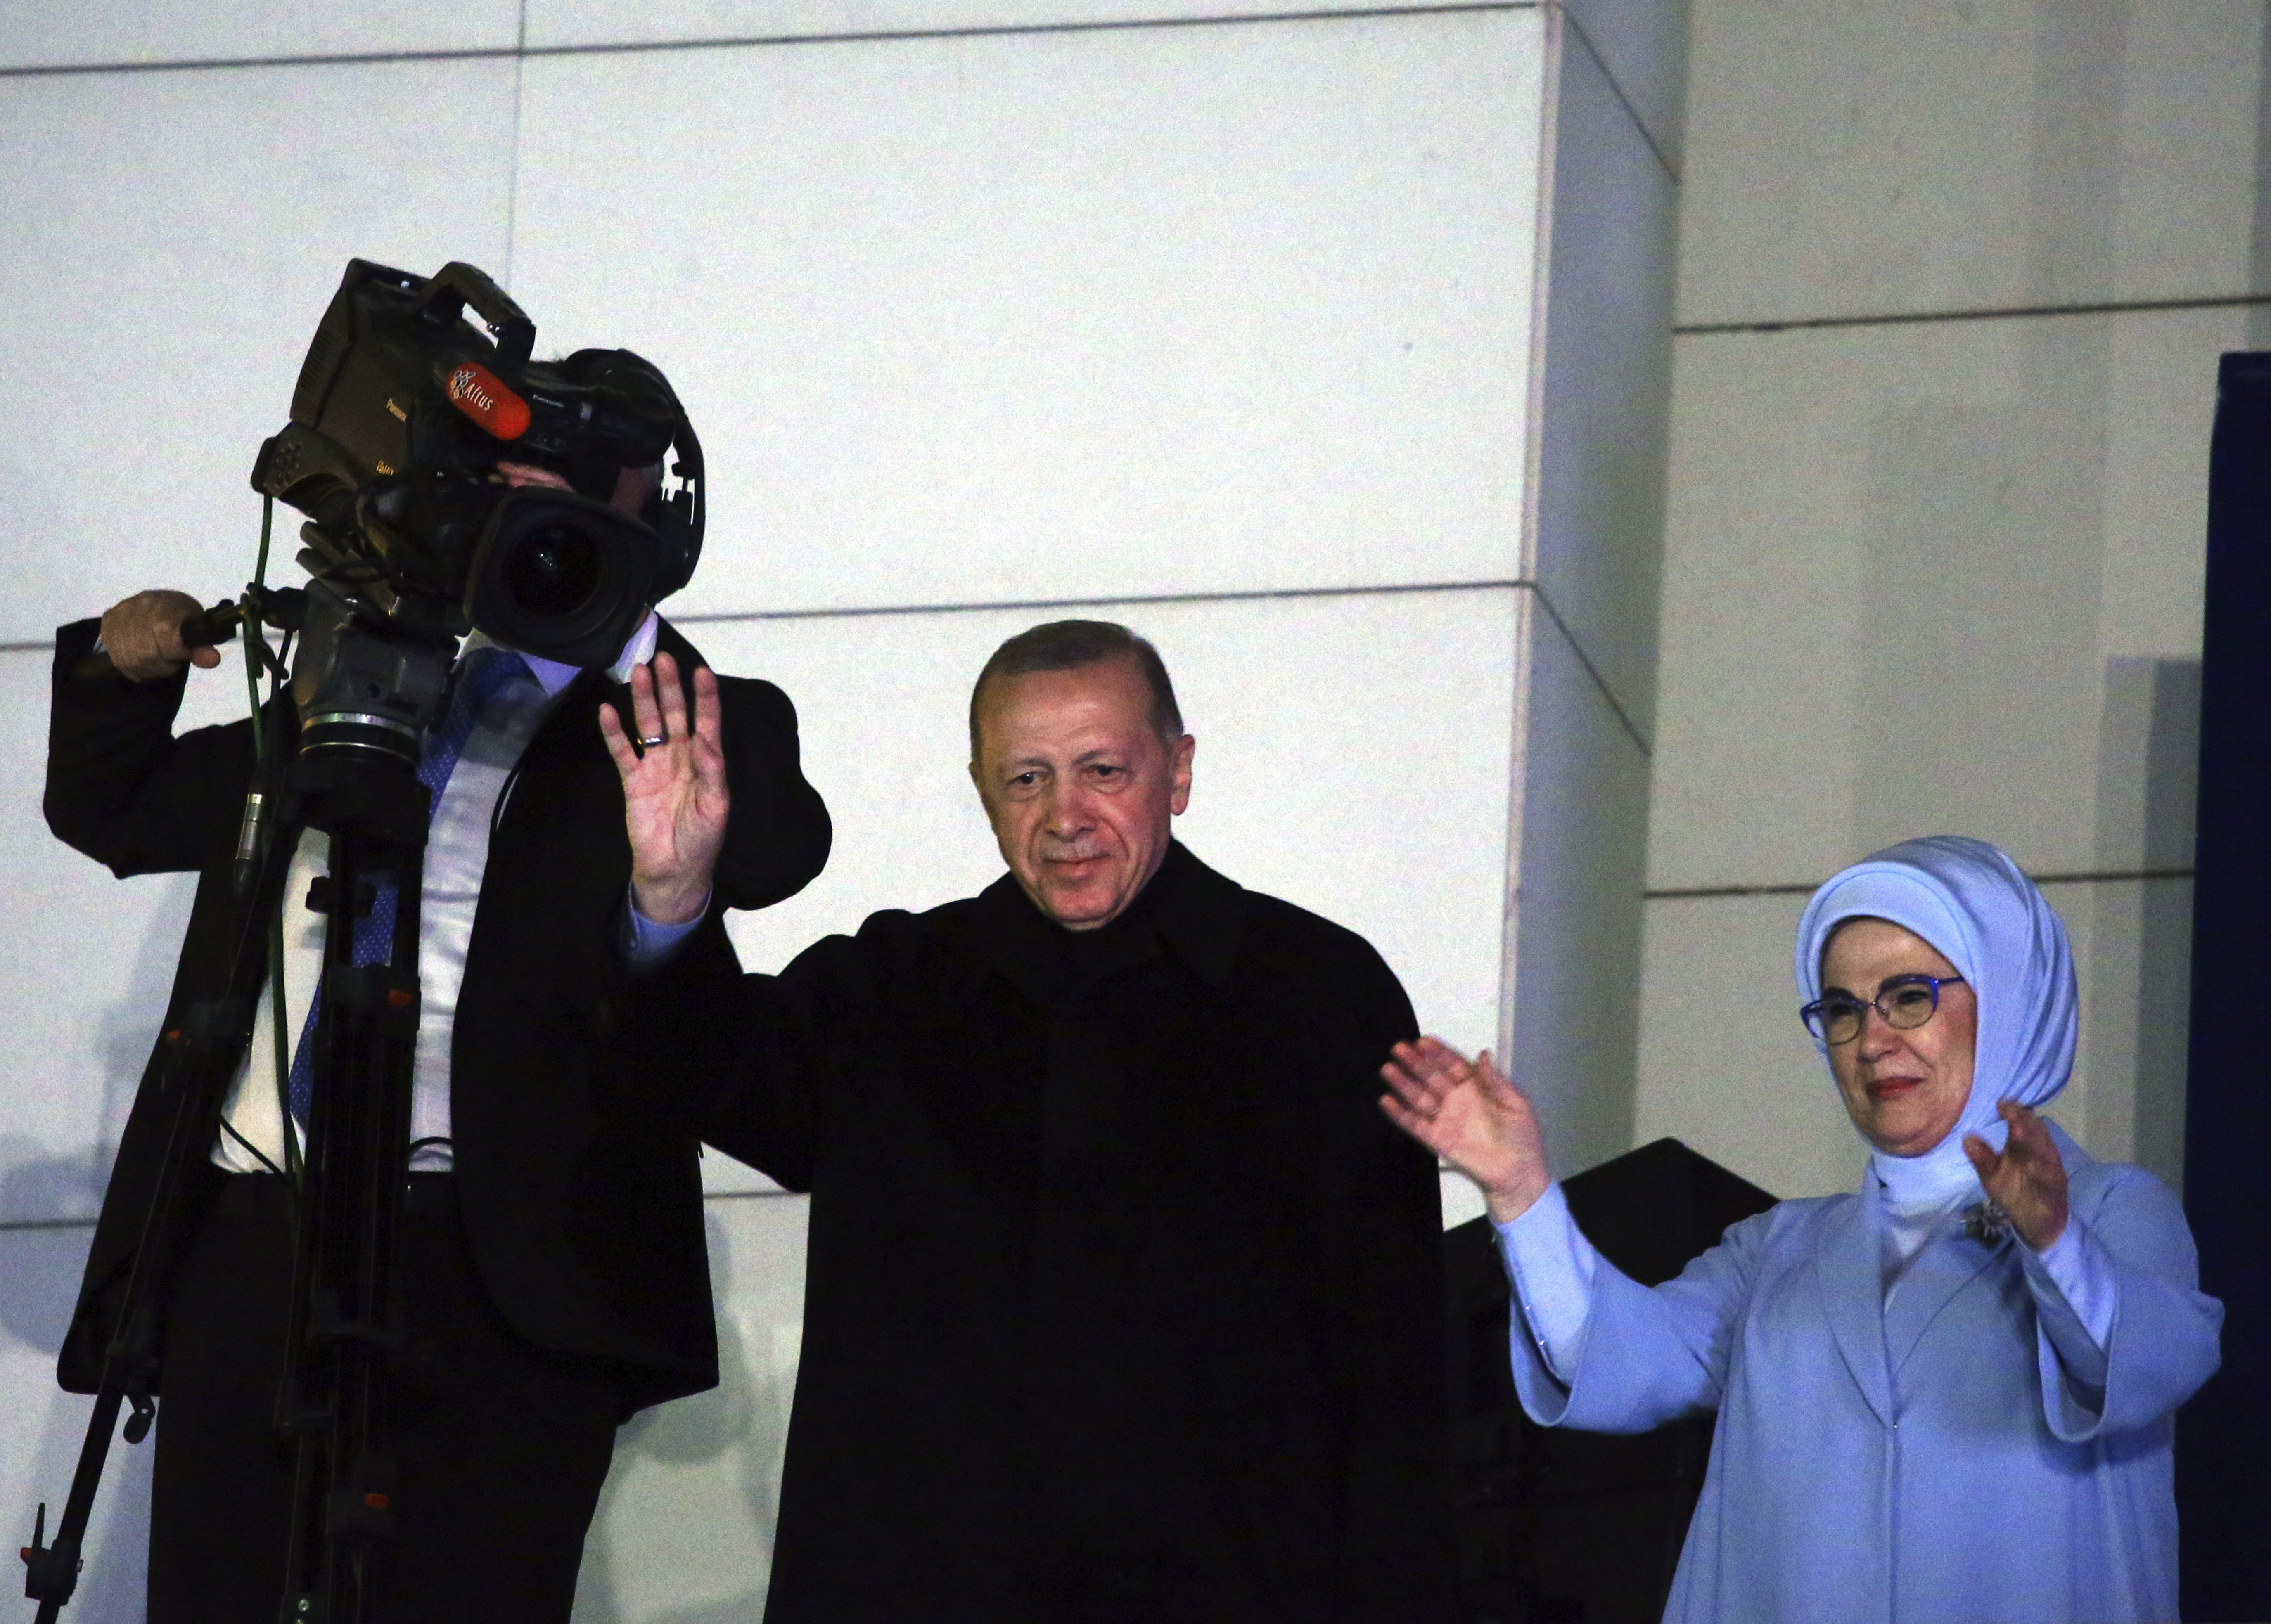 Turkish President Recep Tayyip Erdogan, center, and his wife, Emine, acknowledge supporters at the party headquarters, in Ankara, Turkey, early Monday, May 15, 2023. Erdogan, who has ruled his country with an increasingly firm grip for 20 years, was locked in a tight election race Sunday, with a make-or-break runoff against his chief challenger possible as the final votes were counted. (AP Photo/Ali Unal)Associated Press/LaPresseOnly Italy and Spain